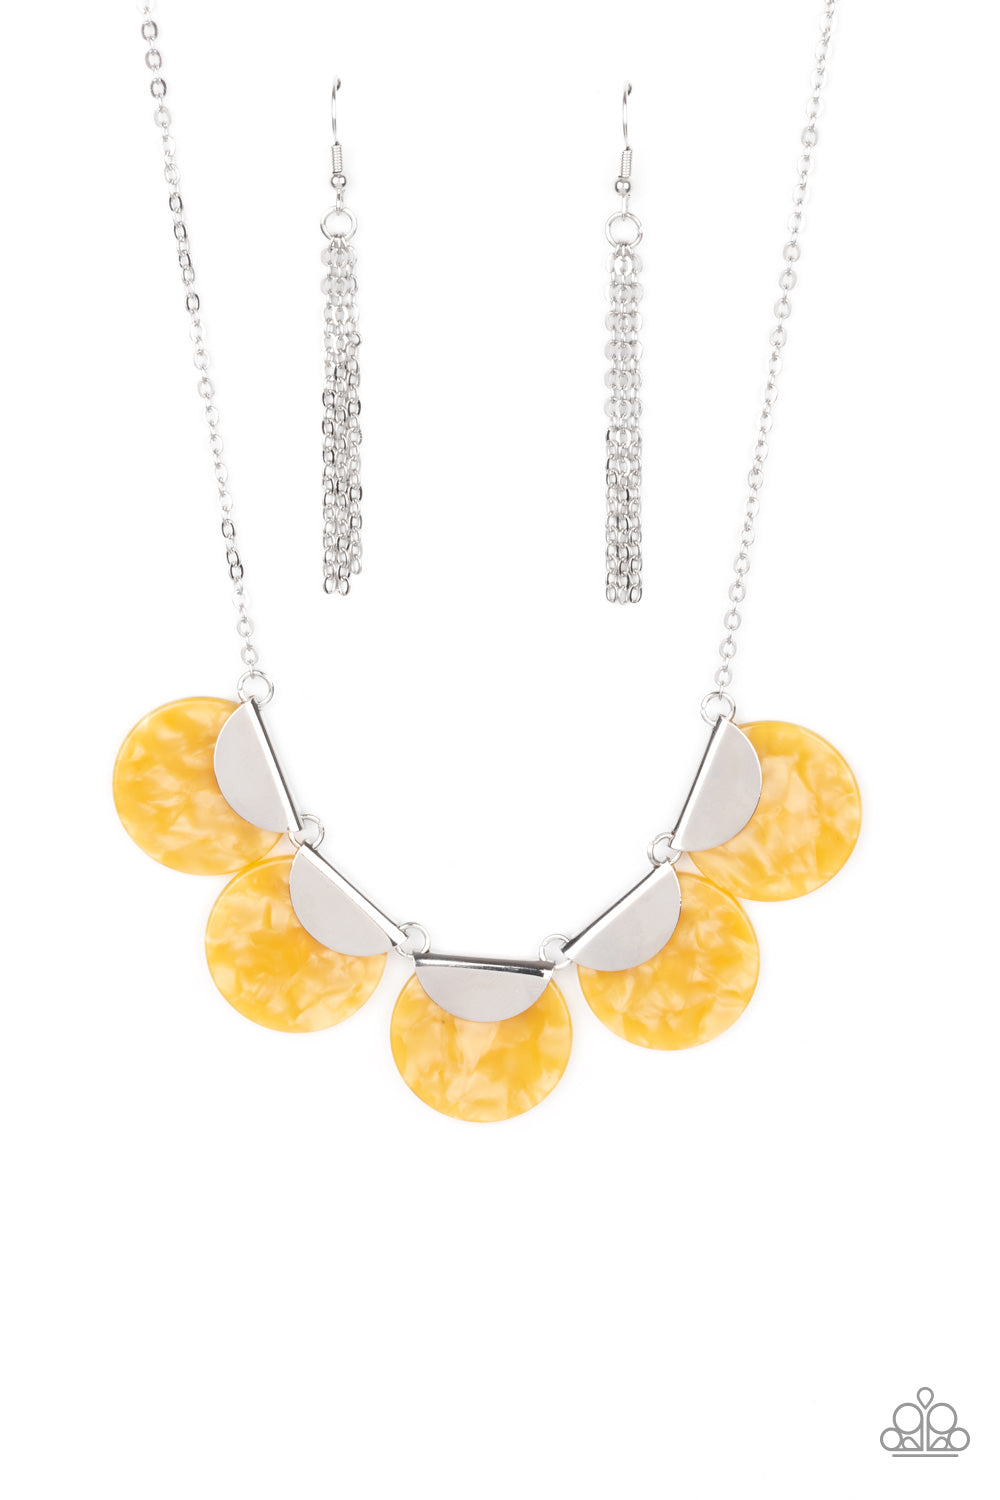 Mermaid Oasis - Yellow Necklace - Paparazzi Accessories